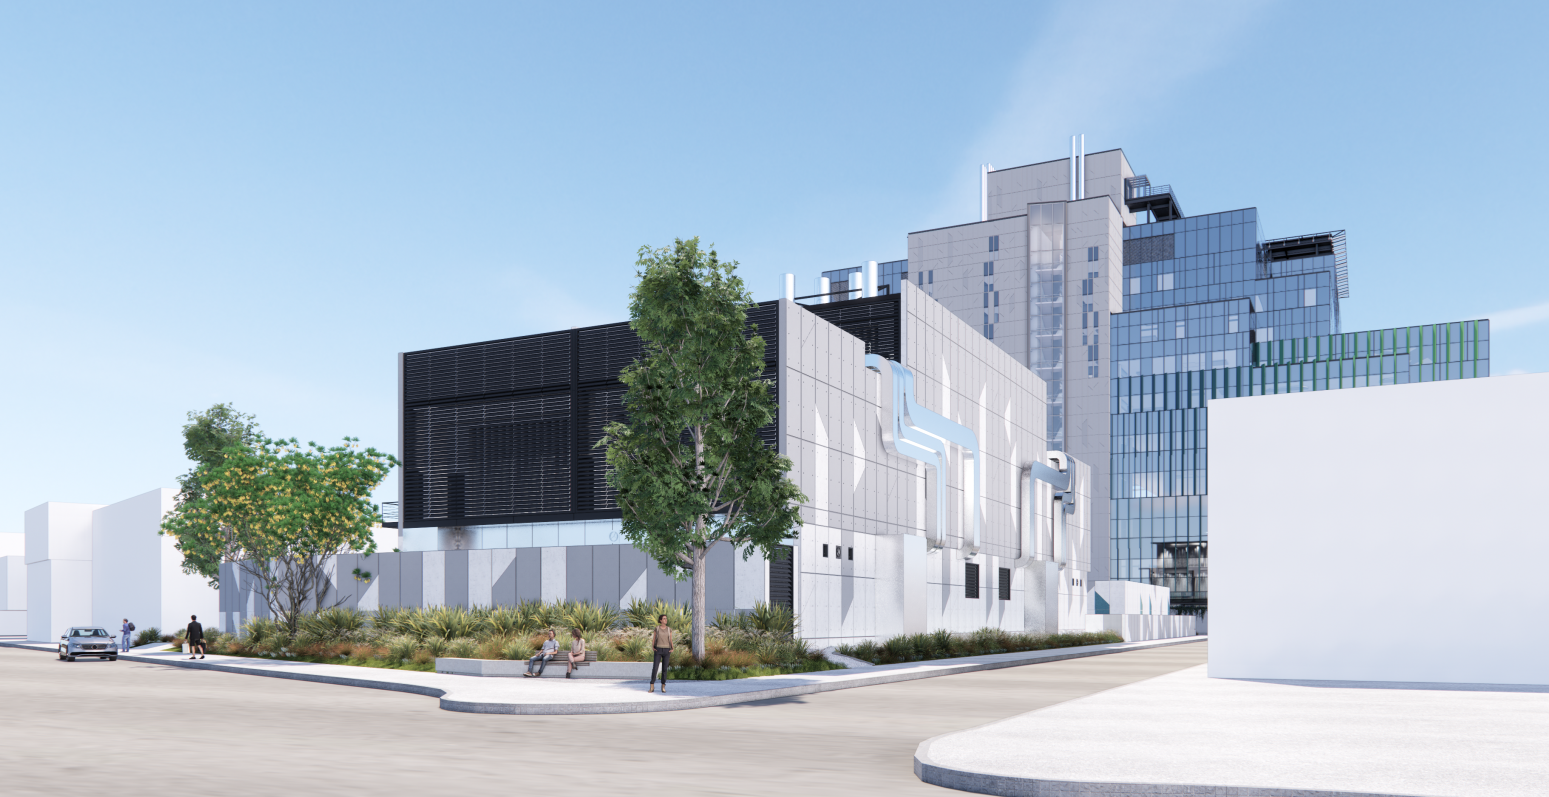 New Dunedin Hospital – Stage 4 Ancillary Services Facilities – Fast Track Consent Granted